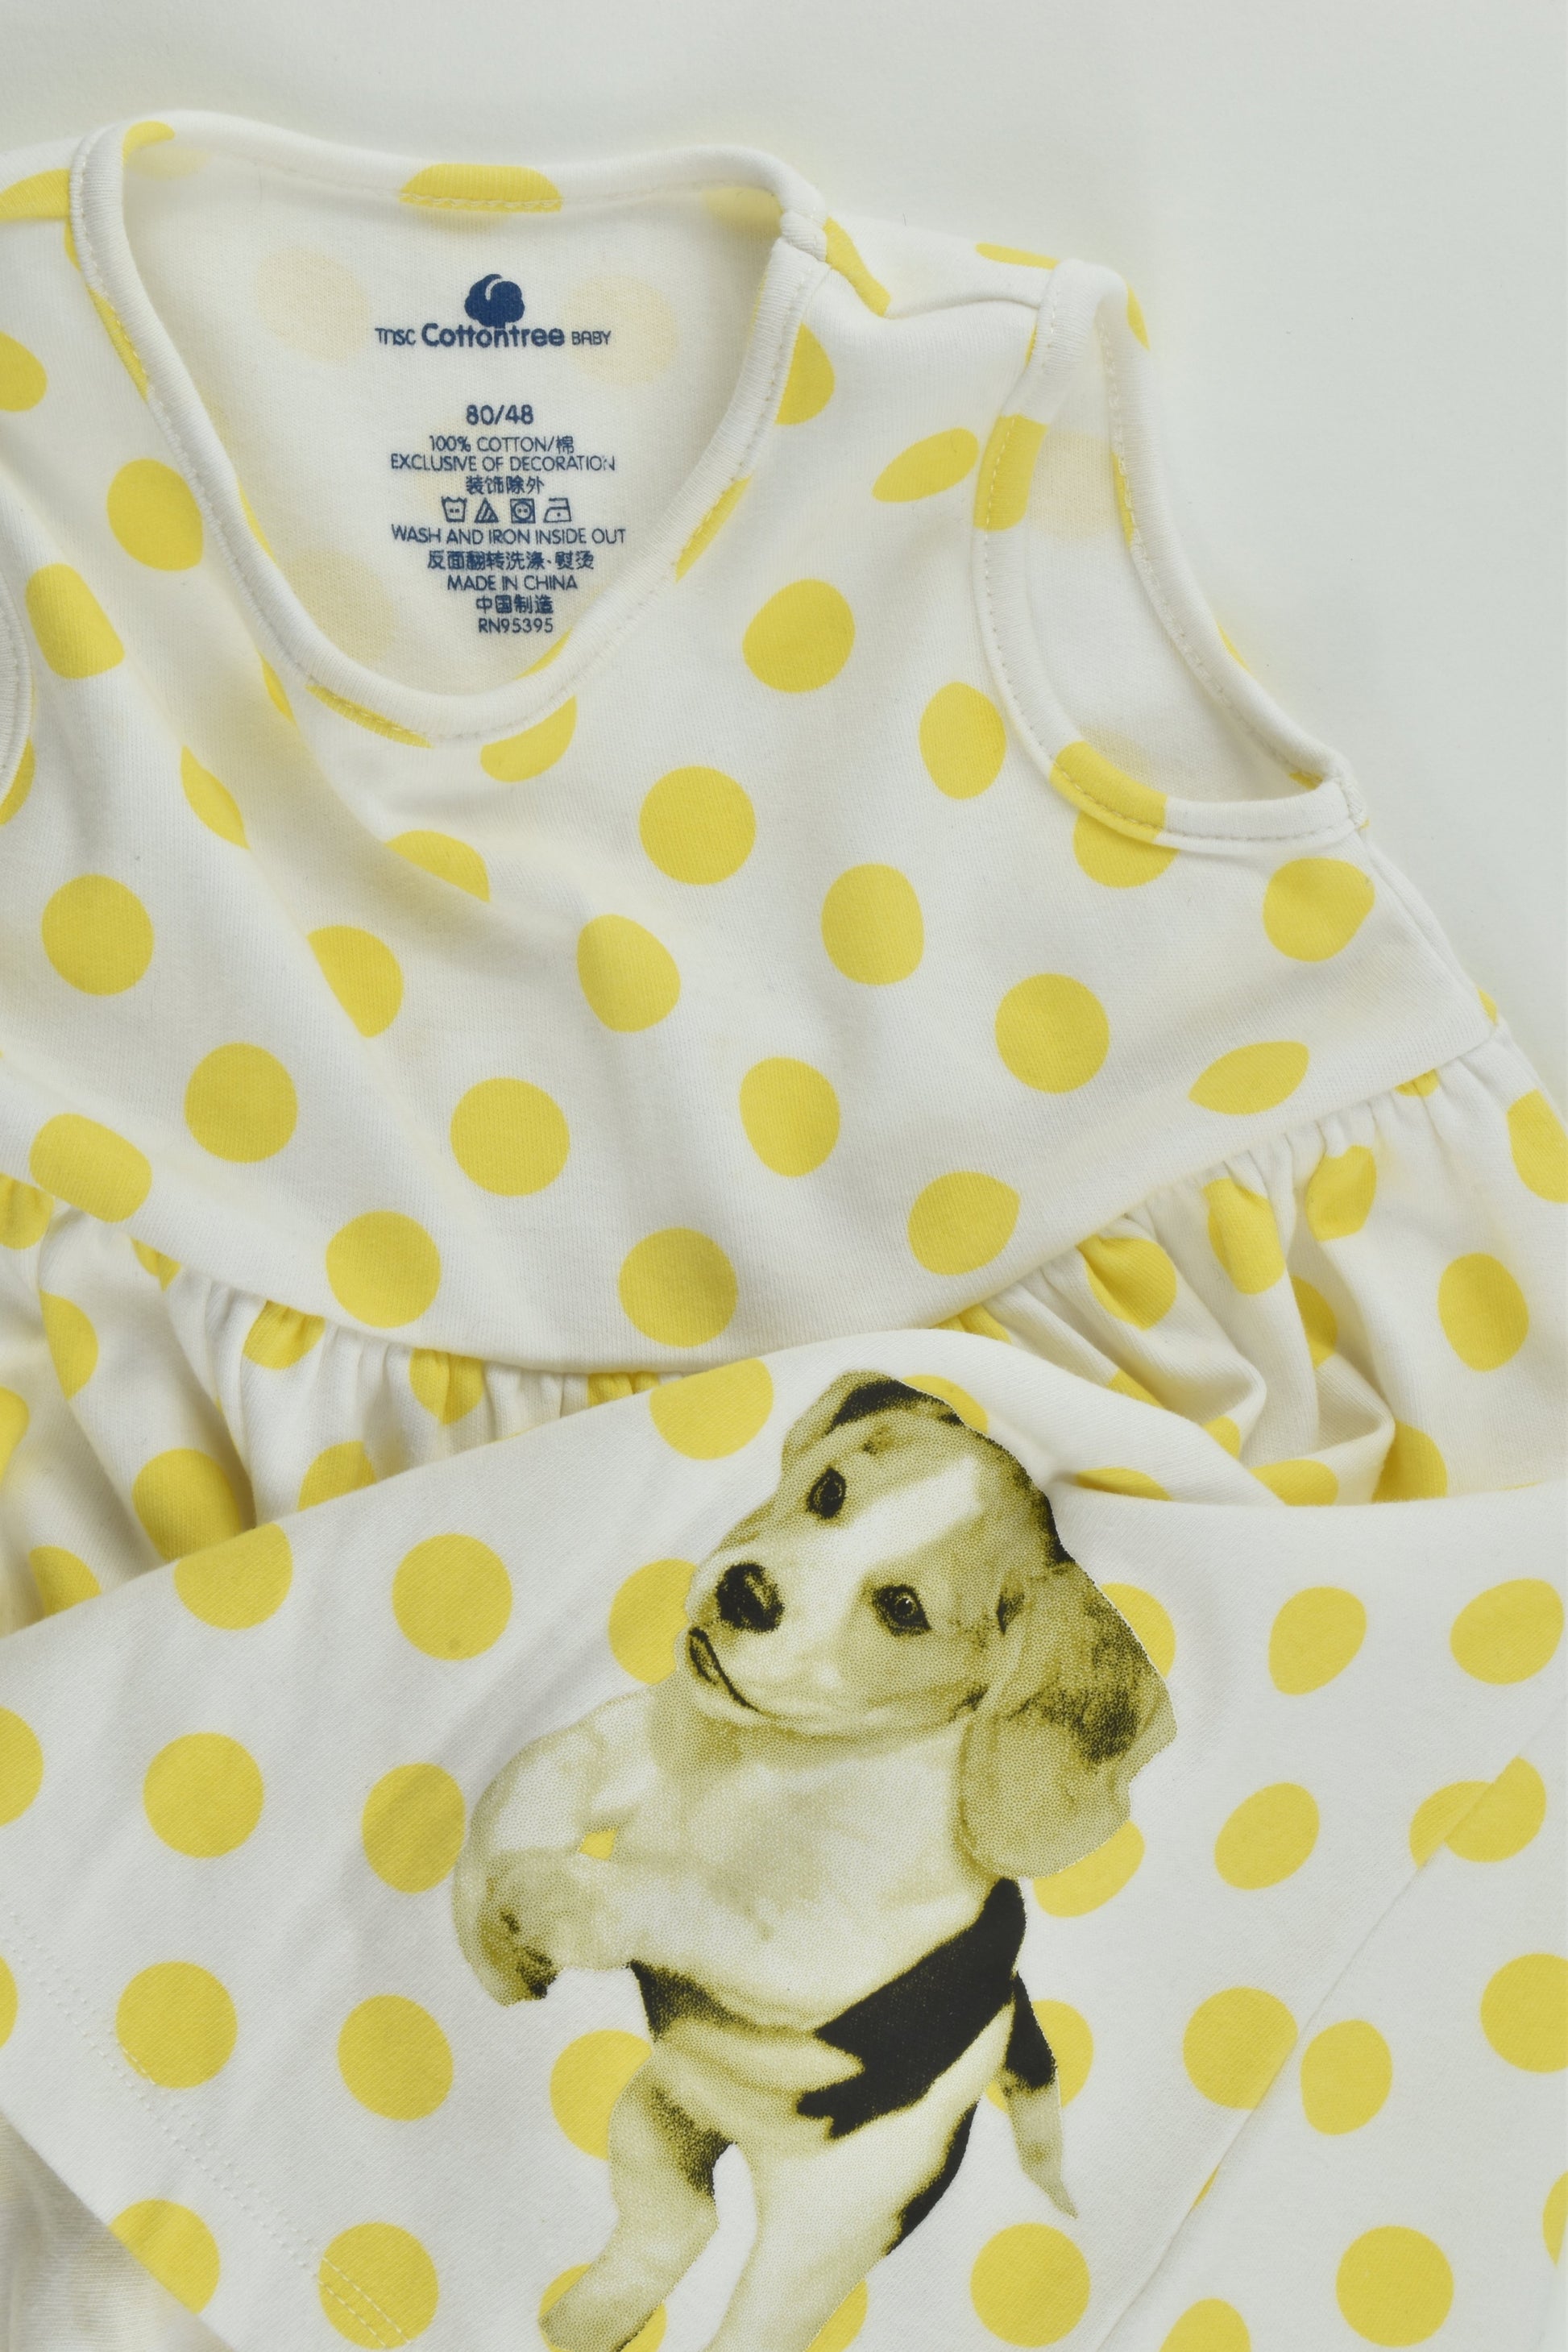 Cottontree Baby Size 1 (80 cm) Polka Dots and Dog Dress